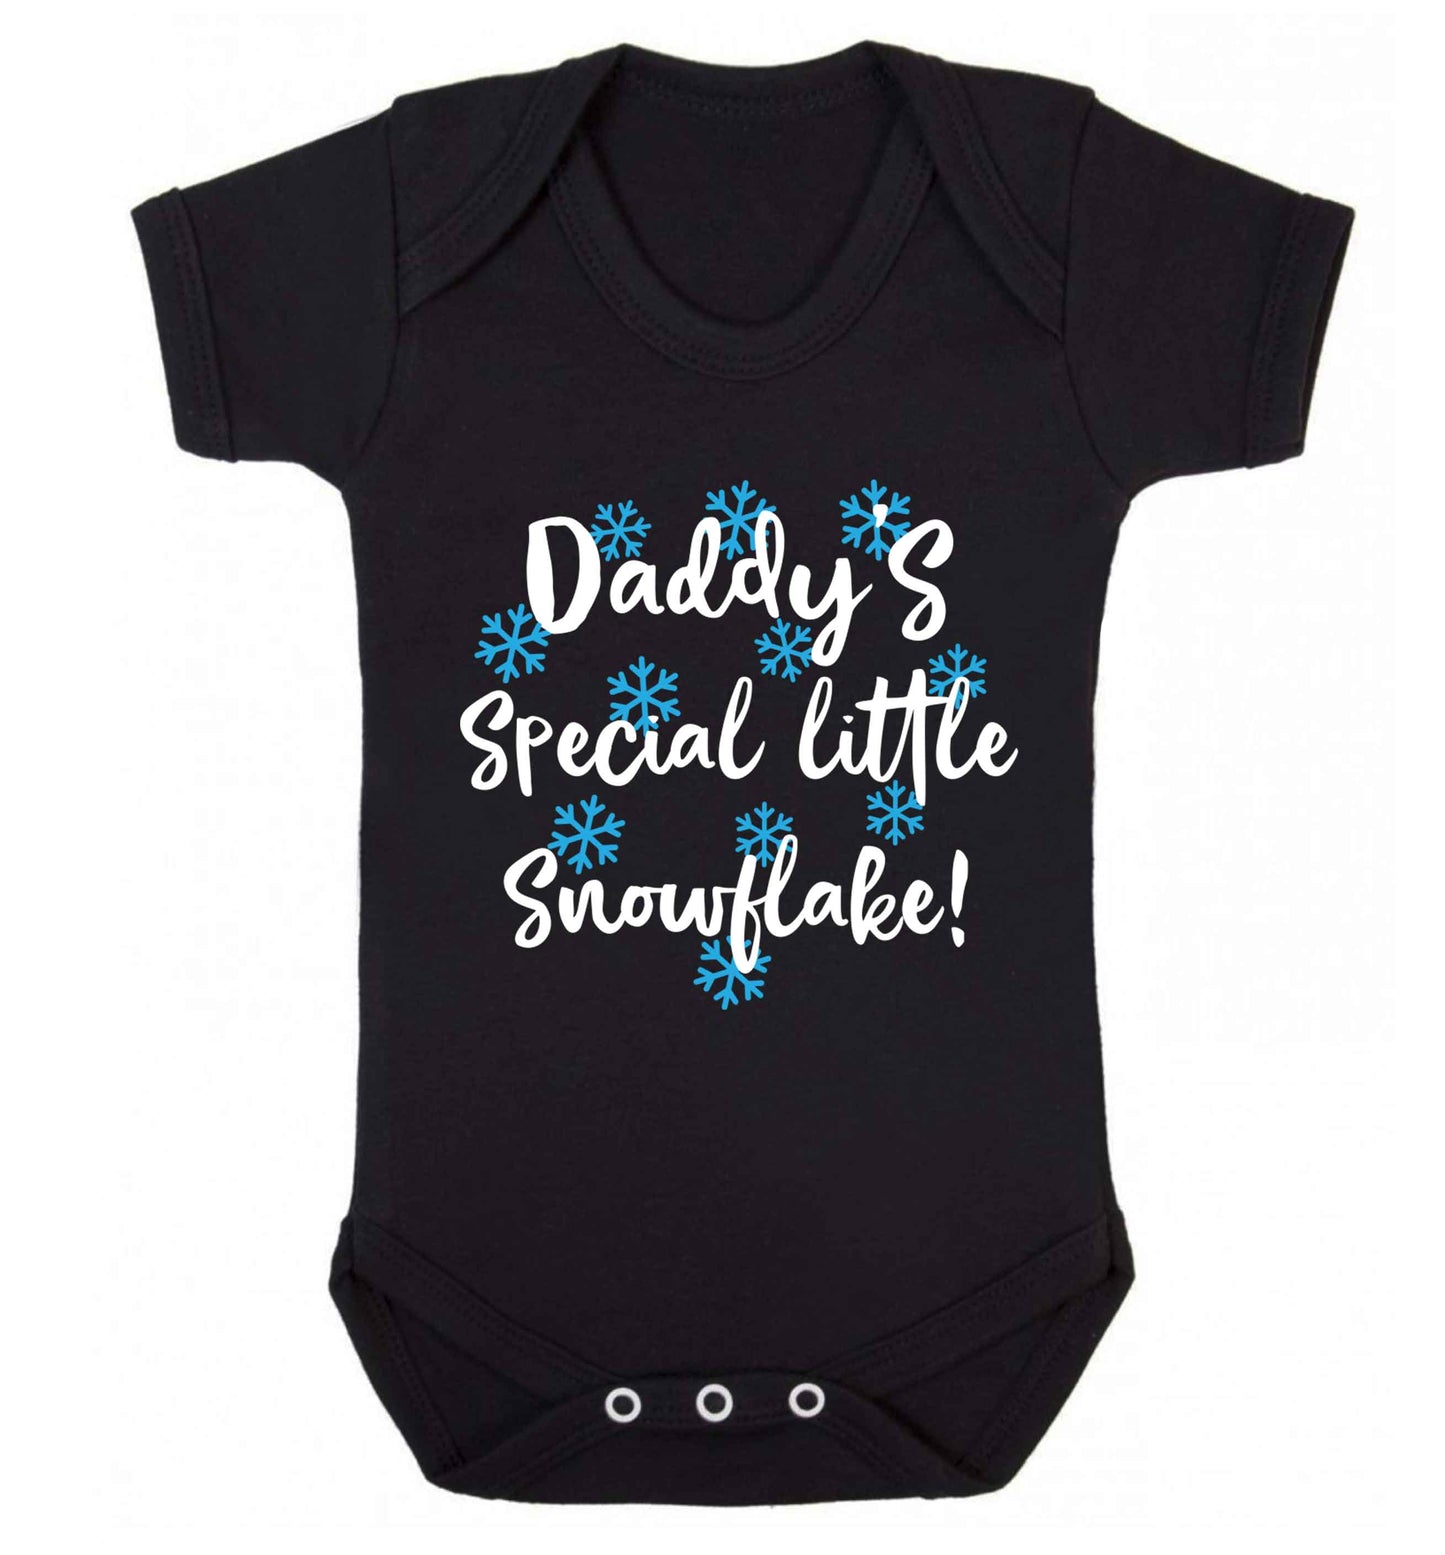 Daddy's special little snowflake Baby Vest black 18-24 months